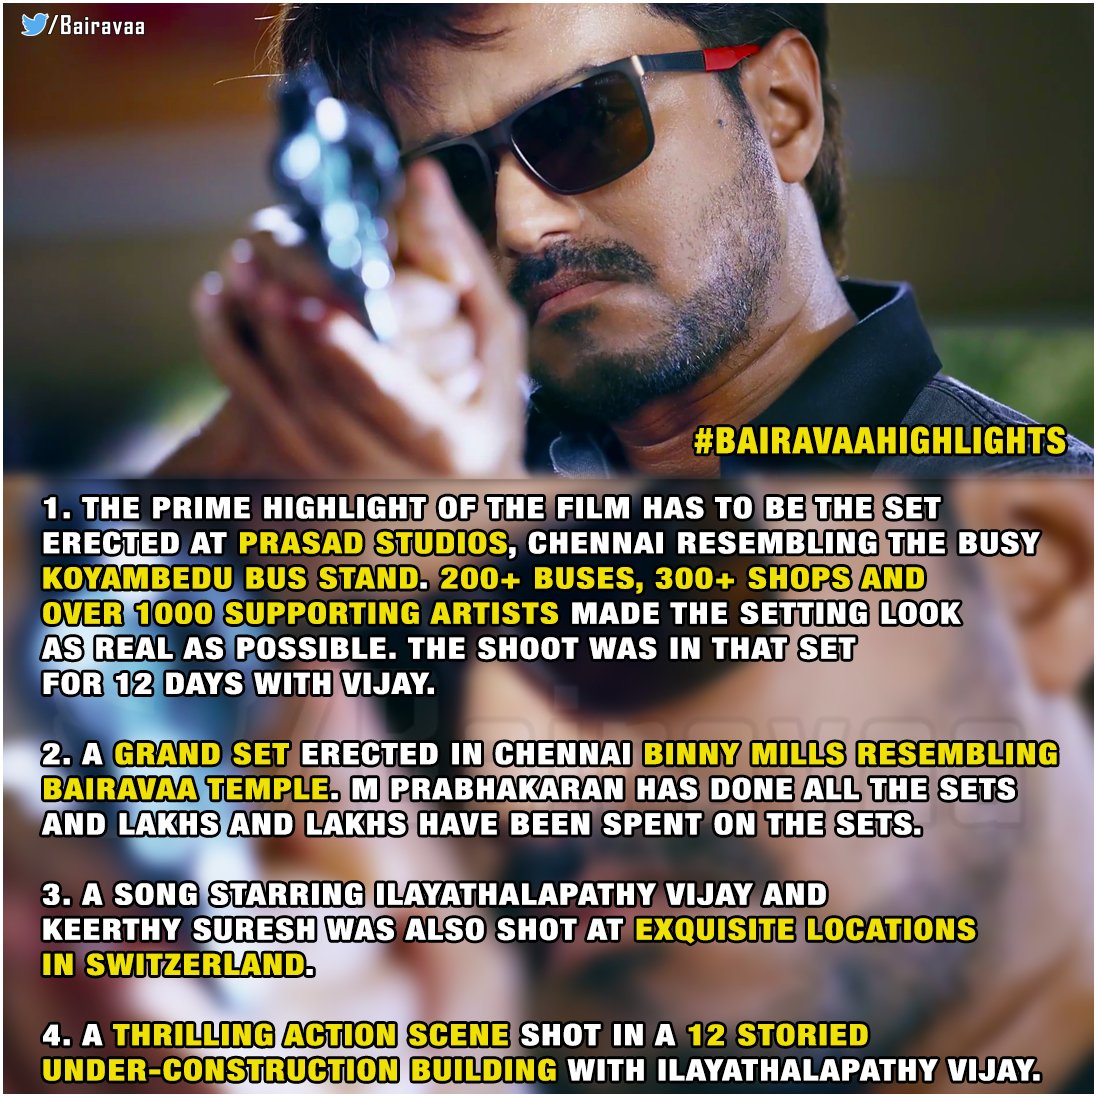 #Bairavaa Prod.#PVenkatramaReddy has revealed some of the best moments in @Bairavaa which r the PrimeHighlights in film
#BairavaaHighlights